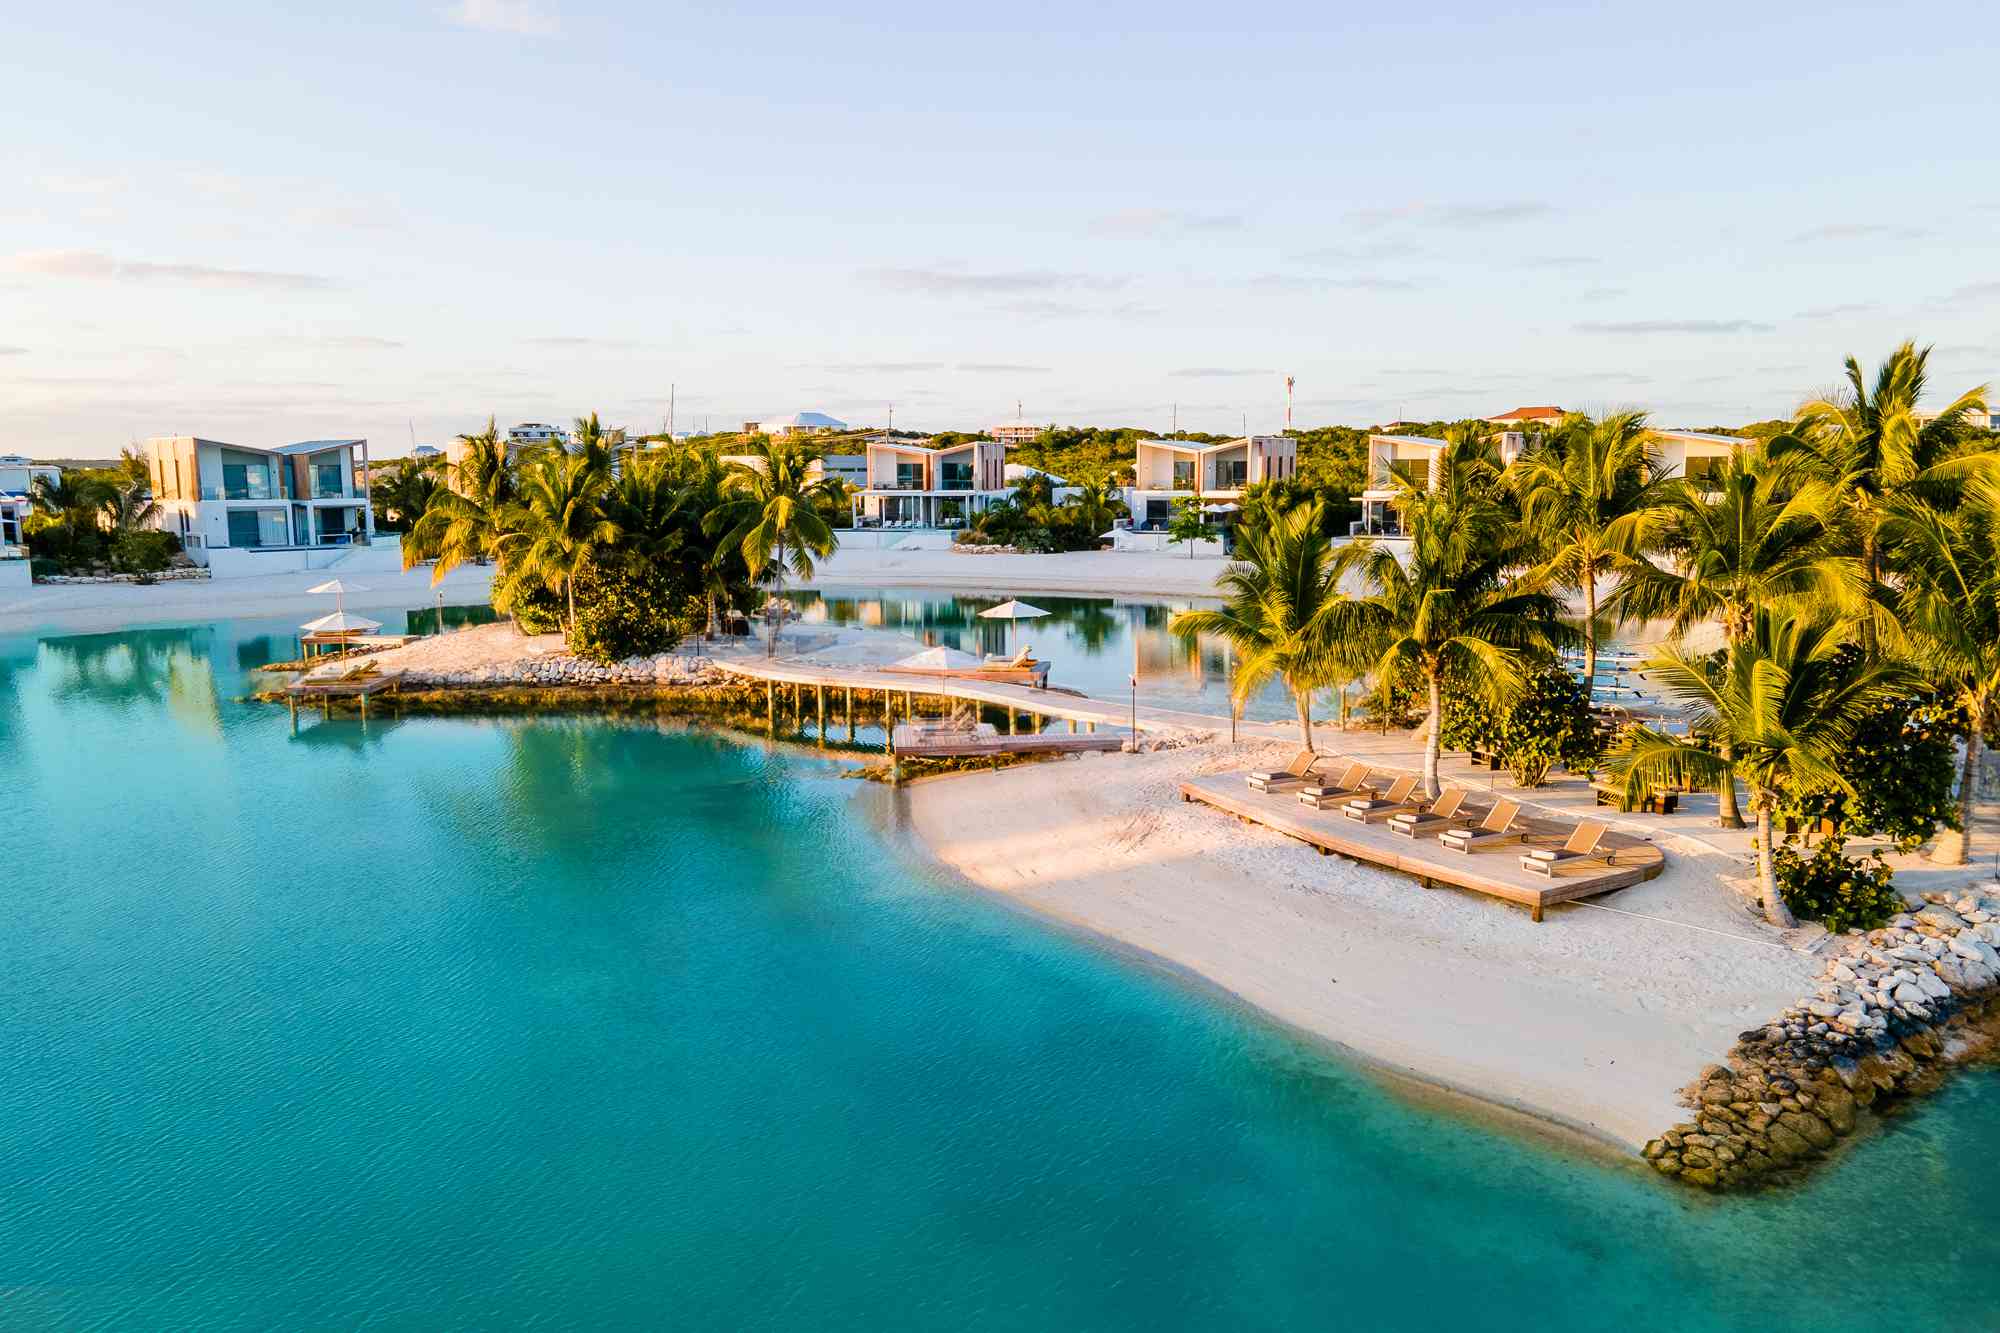 turks and caicos' newest residential resort is now open — and we got a first look